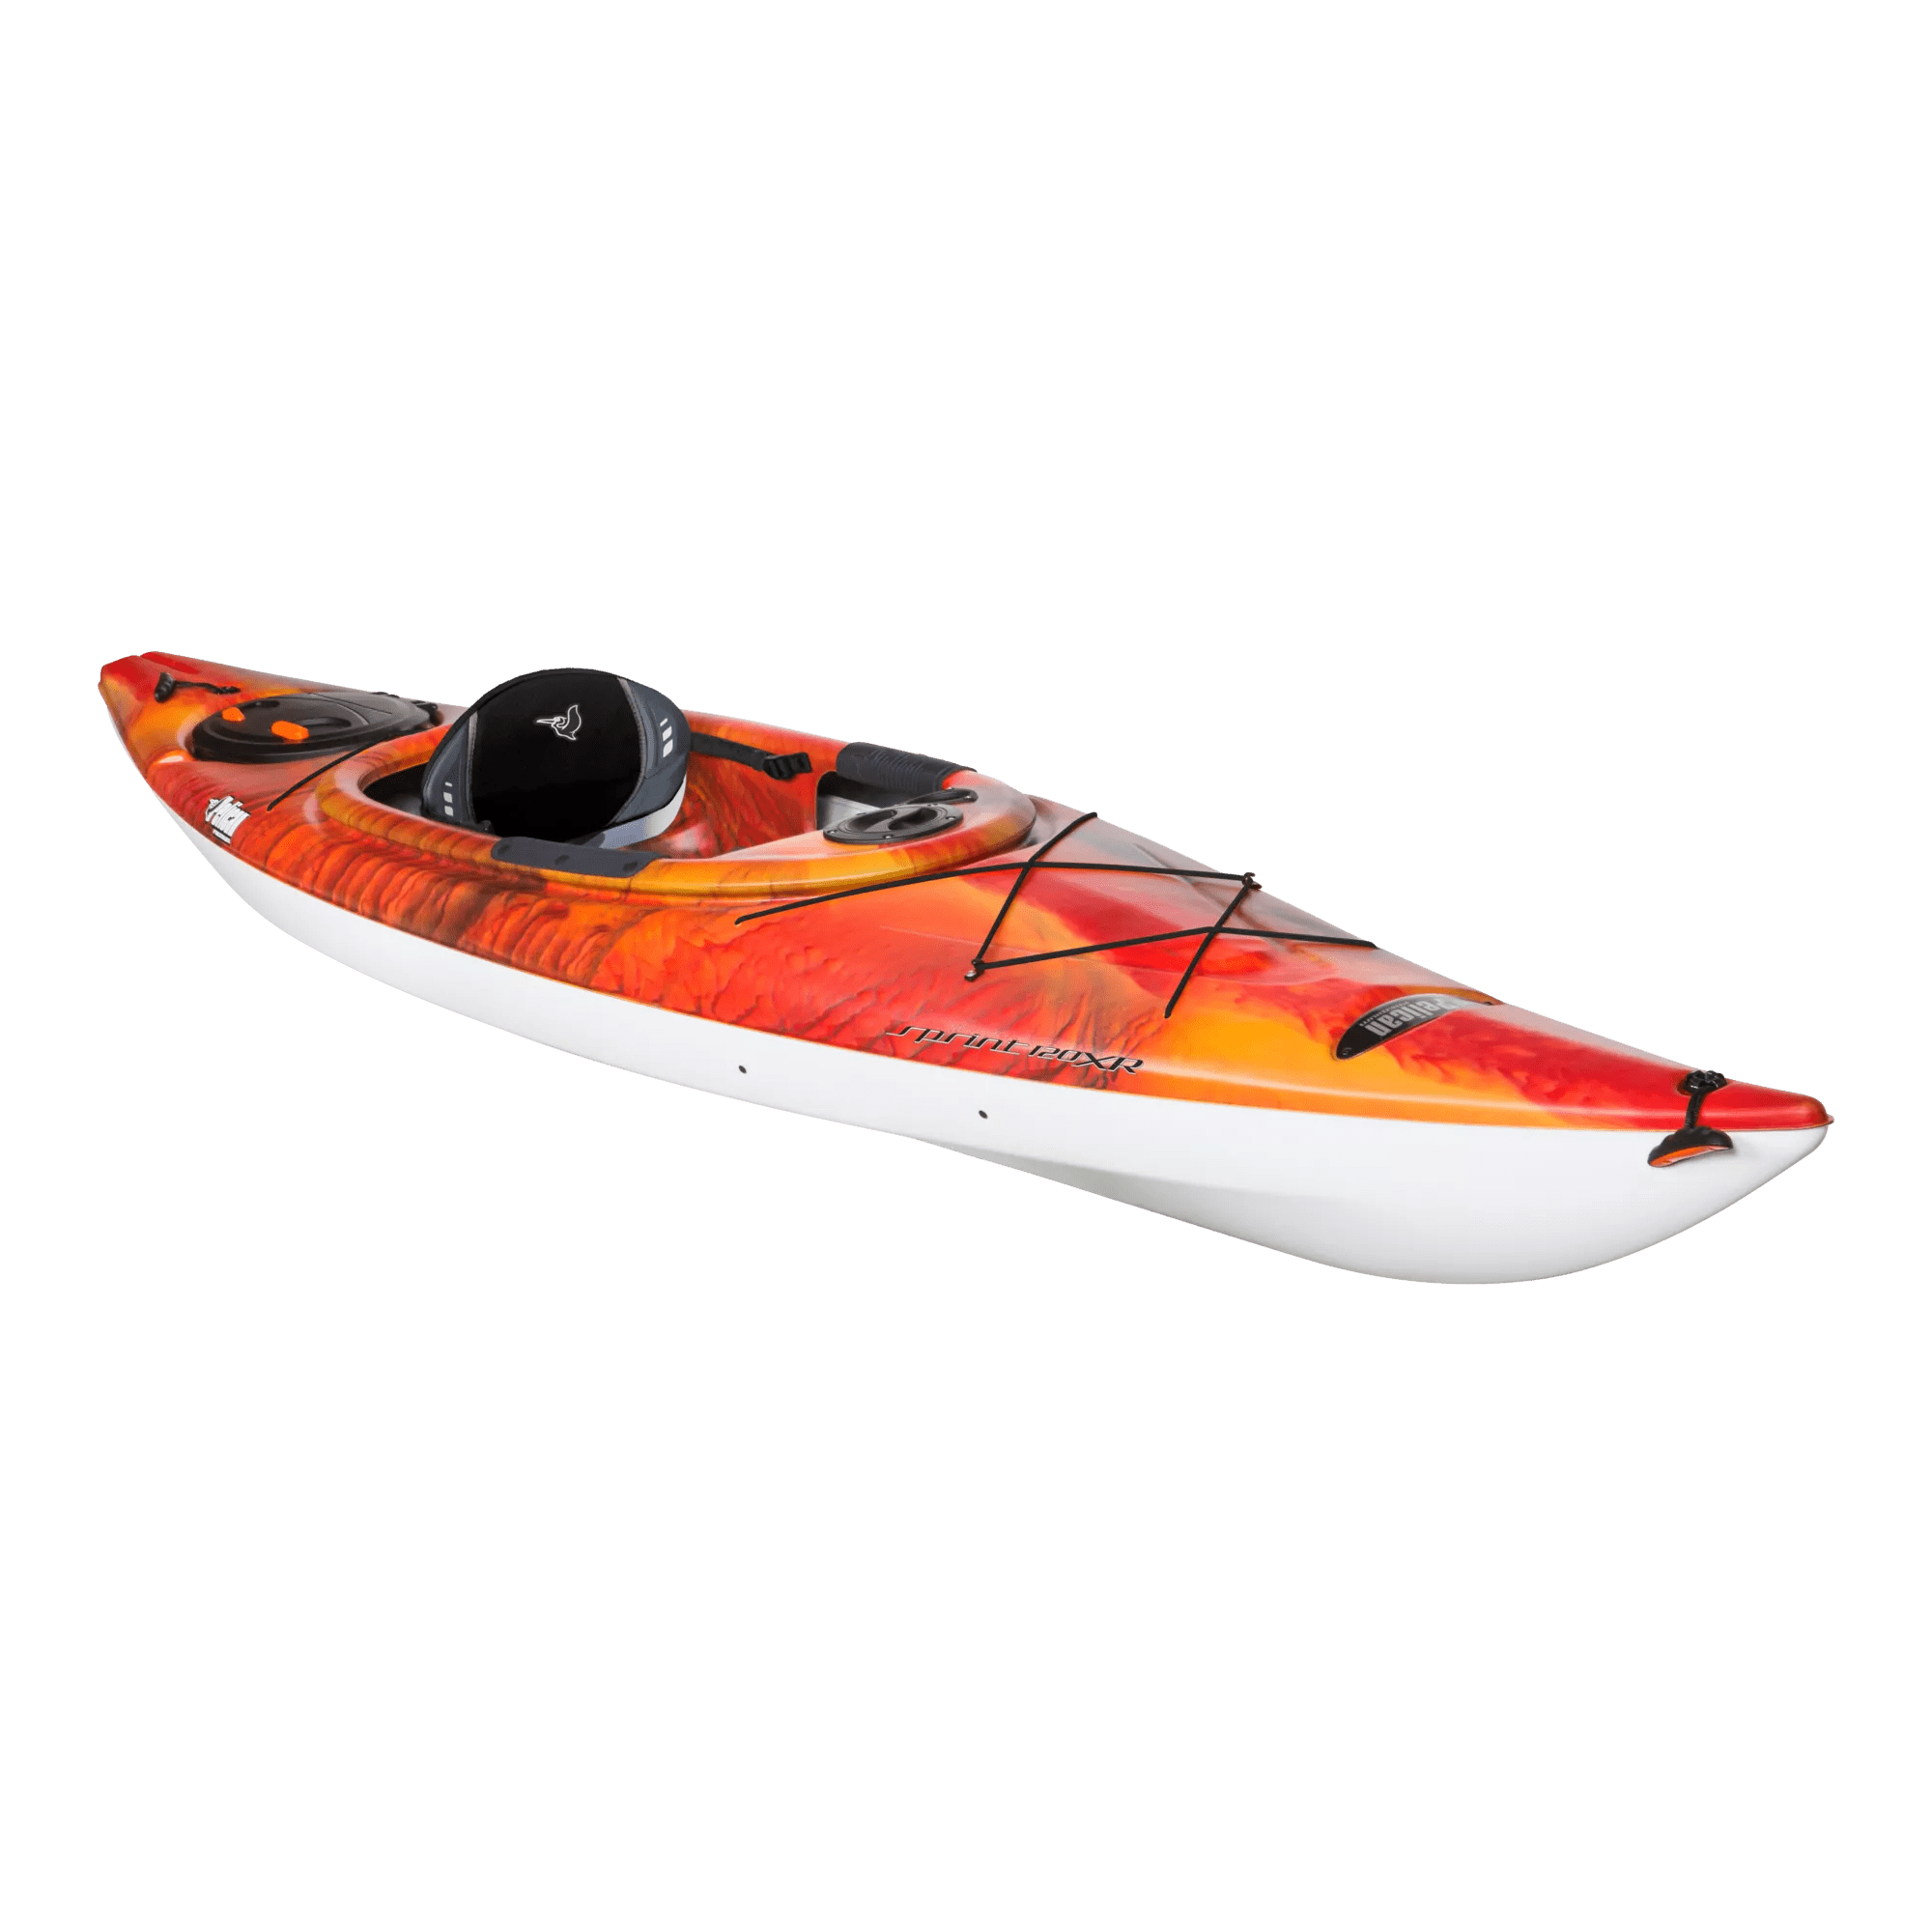 PELICAN - Sprint 120XR Performance Kayak - Discontinued color/model - Yellow - KNP12P100-00 - ISO 